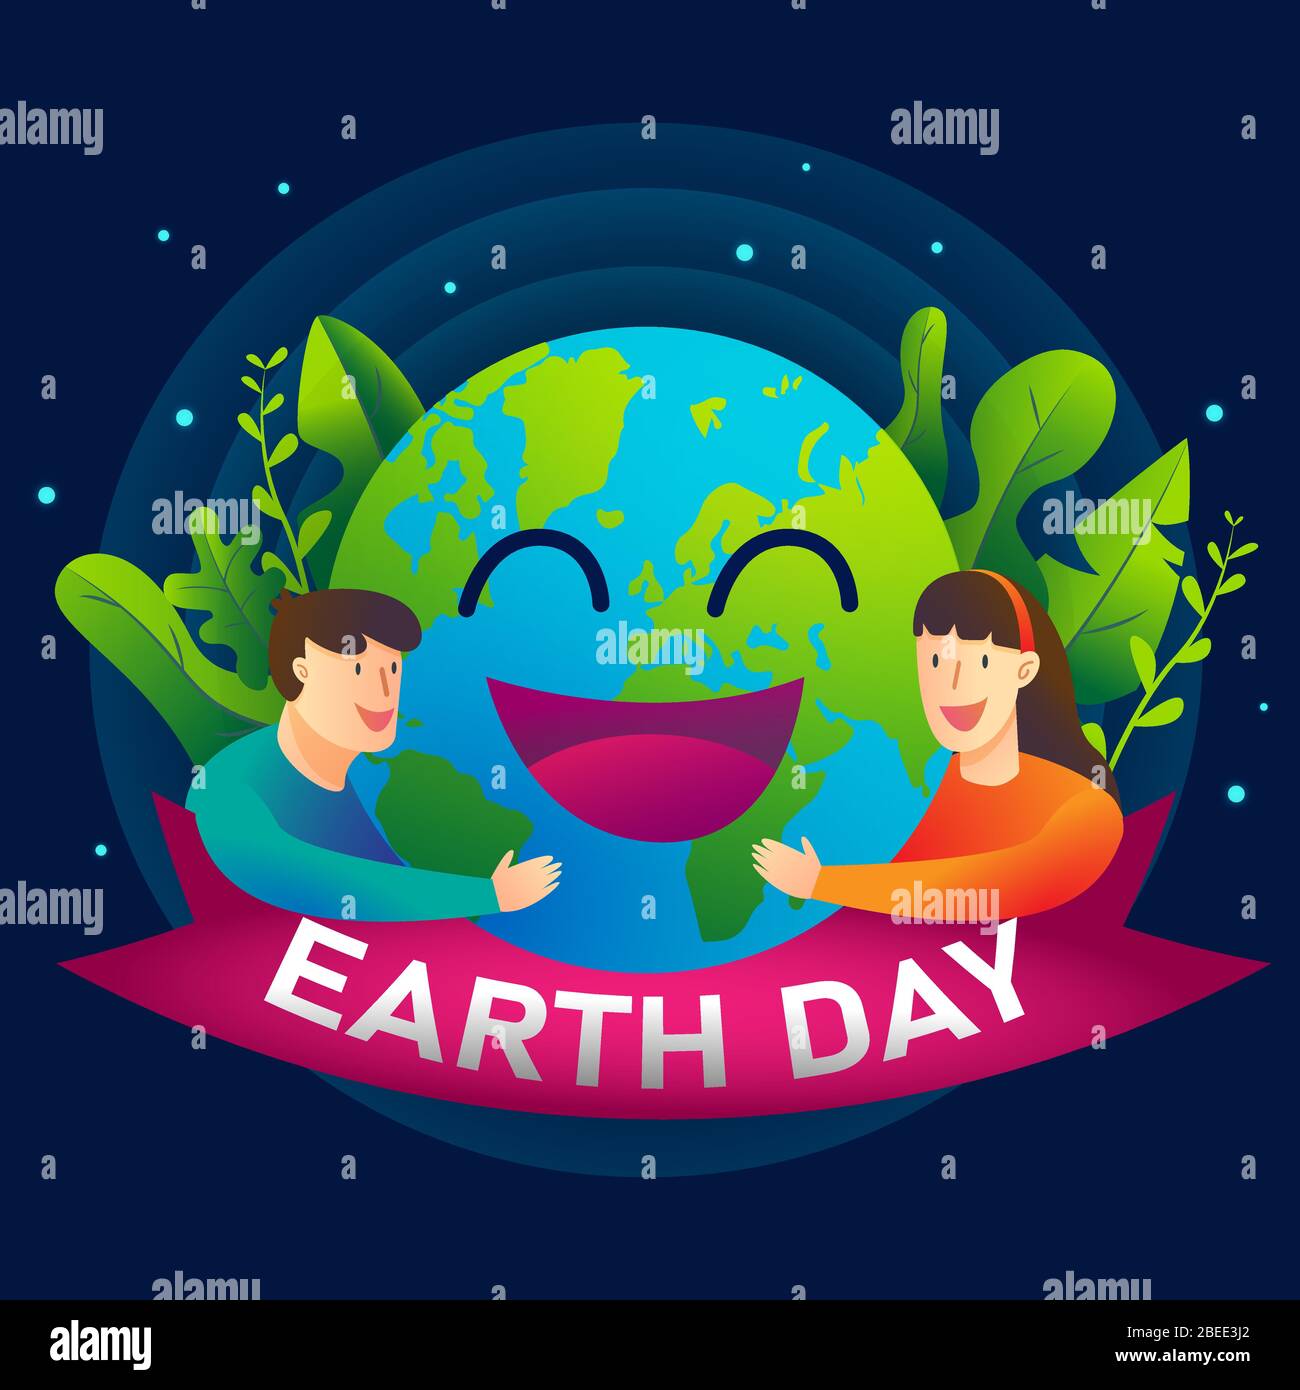 Happy Earth day. Vector human hug the earth illustration with dark background graphic. Use for card, poster, banner, web design Stock Vector